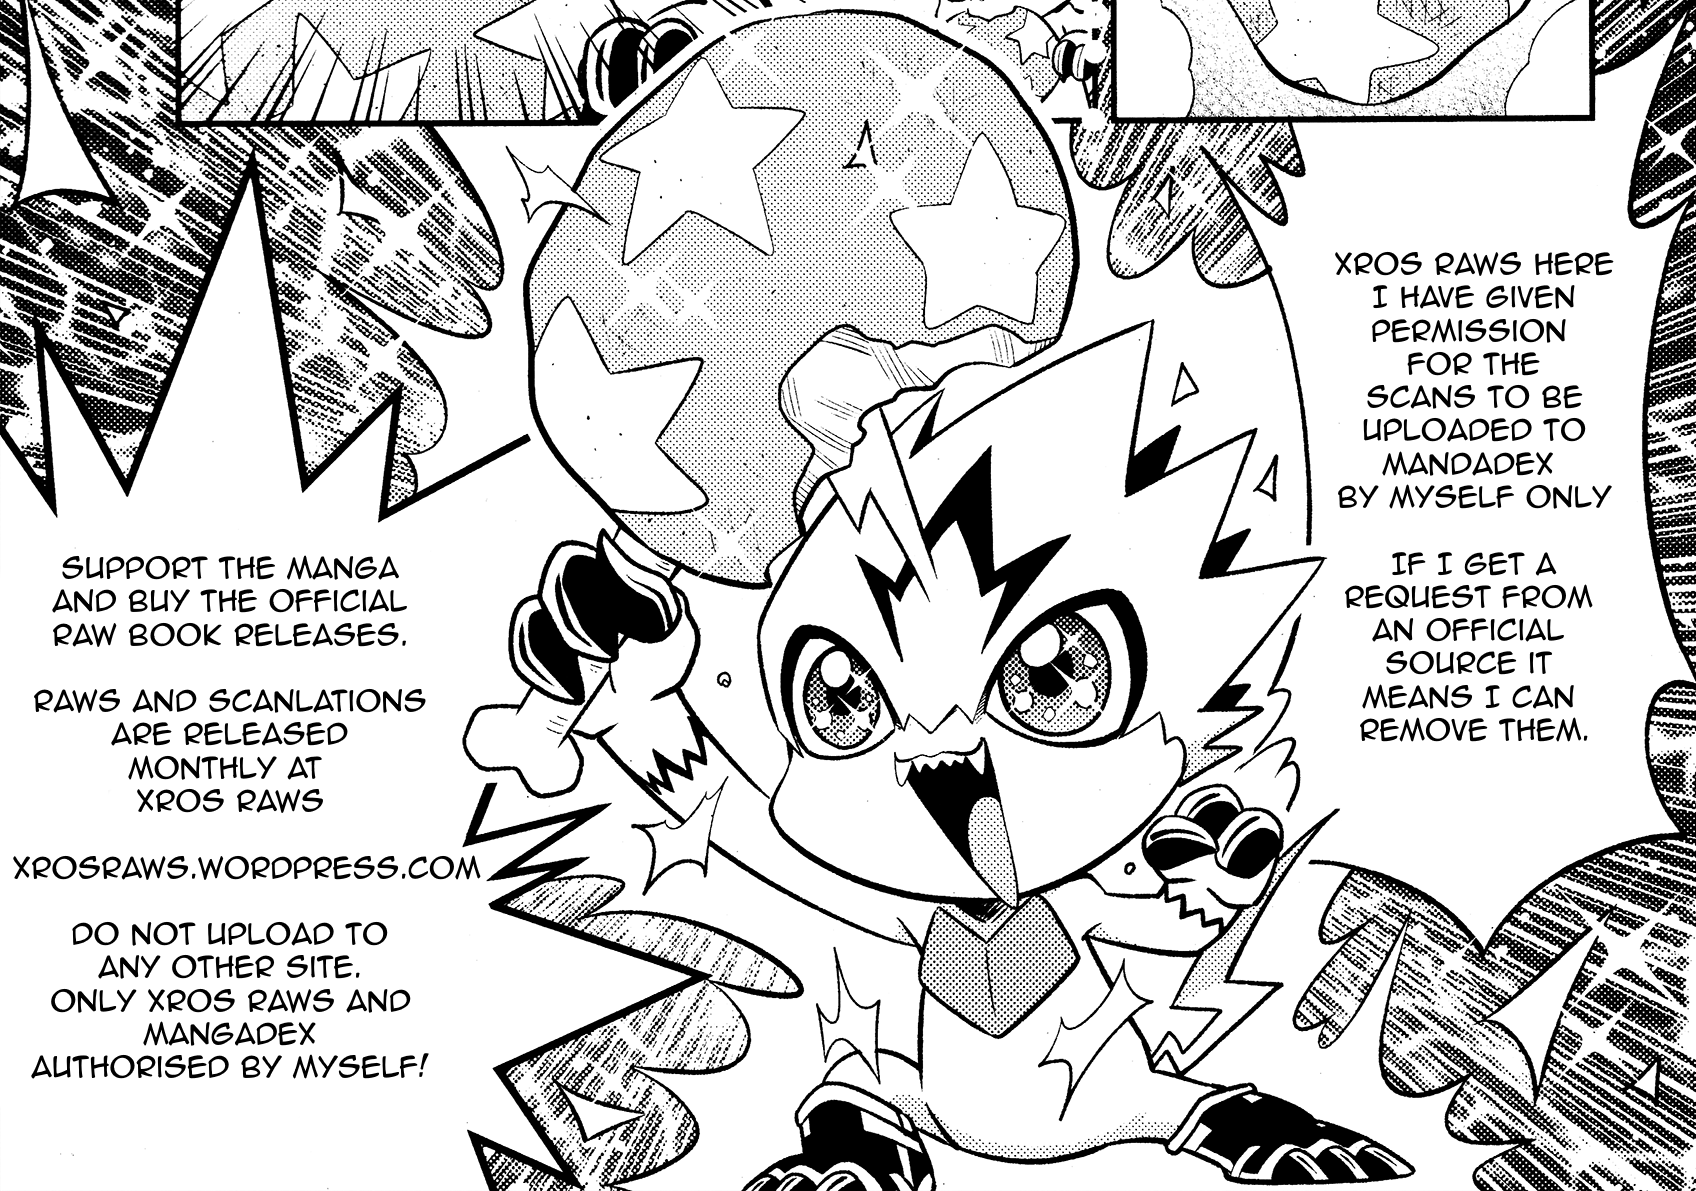 Digimon Dreamers - Page 1